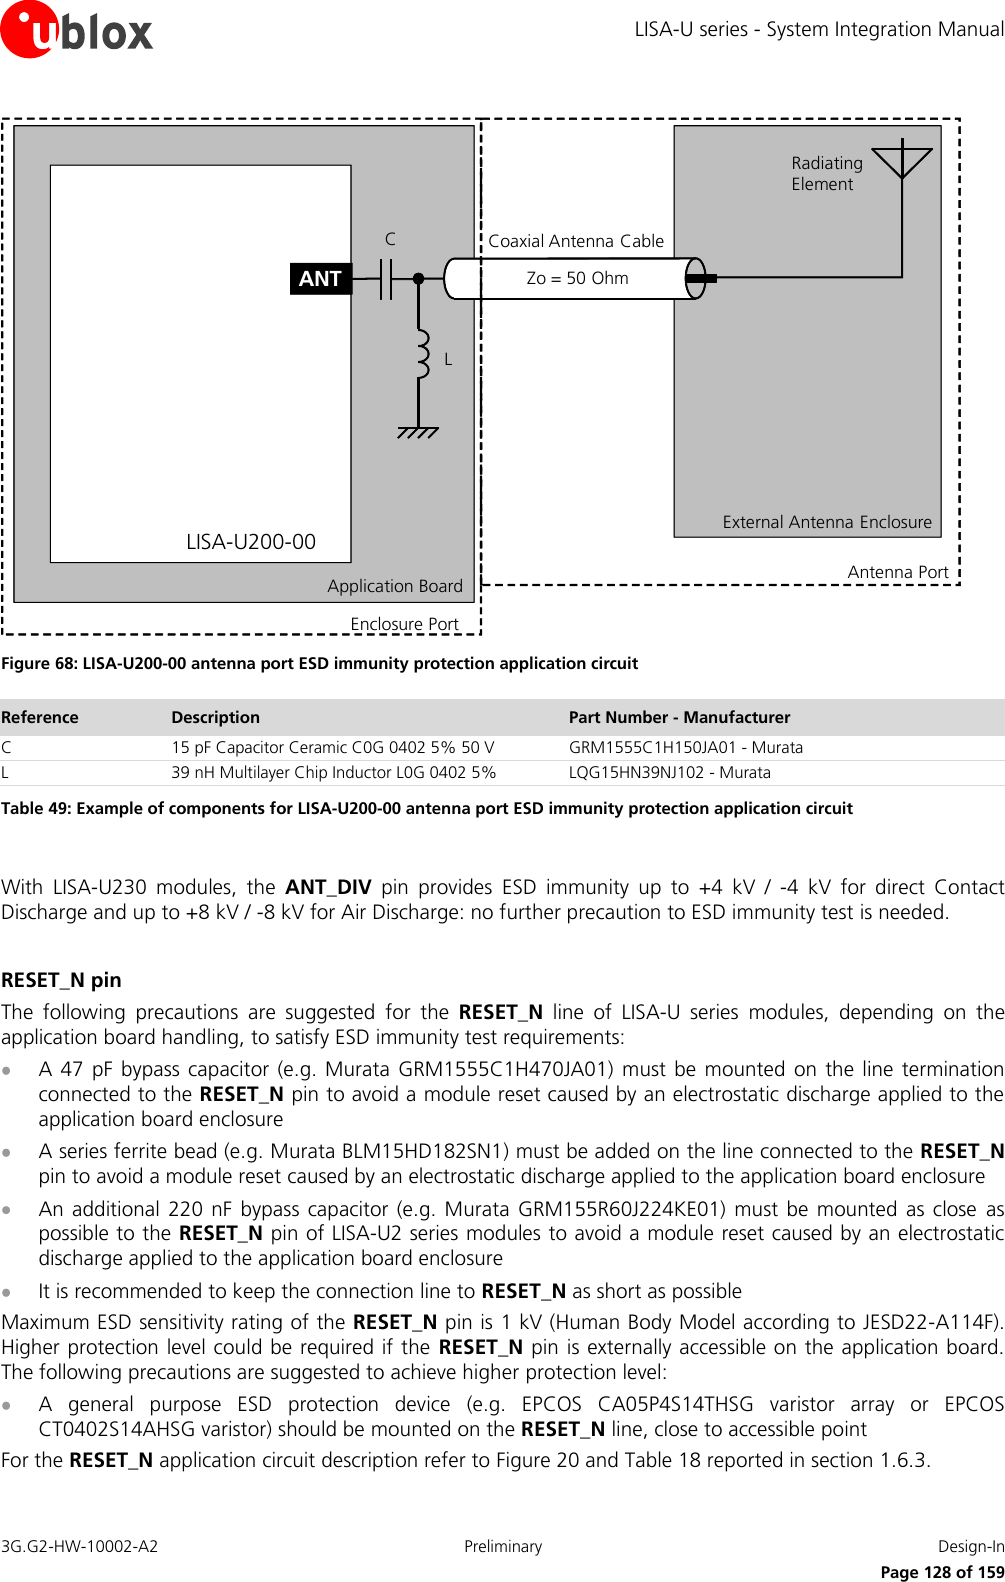 LISA-U series - System Integration Manual 3G.G2-HW-10002-A2  Preliminary  Design-In      Page 128 of 159 External Antenna EnclosureApplication BoardLISA-U200-00ANTRadiating ElementZo = 50 OhmCoaxial Antenna CableAntenna PortEnclosure PortCL Figure 68: LISA-U200-00 antenna port ESD immunity protection application circuit Reference Description Part Number - Manufacturer C 15 pF Capacitor Ceramic C0G 0402 5% 50 V GRM1555C1H150JA01 - Murata L 39 nH Multilayer Chip Inductor L0G 0402 5% LQG15HN39NJ102 - Murata Table 49: Example of components for LISA-U200-00 antenna port ESD immunity protection application circuit  With  LISA-U230  modules,  the  ANT_DIV  pin  provides  ESD  immunity  up  to  +4  kV  /  -4  kV  for  direct  Contact Discharge and up to +8 kV / -8 kV for Air Discharge: no further precaution to ESD immunity test is needed.  RESET_N pin The  following  precautions  are  suggested  for  the  RESET_N  line  of  LISA-U  series  modules,  depending  on  the application board handling, to satisfy ESD immunity test requirements:  A 47  pF bypass  capacitor  (e.g. Murata GRM1555C1H470JA01)  must  be mounted  on the  line termination connected to the RESET_N pin to avoid a module reset caused by an electrostatic discharge applied to the application board enclosure  A series ferrite bead (e.g. Murata BLM15HD182SN1) must be added on the line connected to the RESET_N pin to avoid a module reset caused by an electrostatic discharge applied to the application board enclosure  An additional 220  nF bypass capacitor  (e.g. Murata  GRM155R60J224KE01)  must be mounted as  close  as possible to the RESET_N pin of LISA-U2 series modules to avoid a module reset caused by an electrostatic discharge applied to the application board enclosure  It is recommended to keep the connection line to RESET_N as short as possible Maximum ESD sensitivity rating of the RESET_N pin is 1 kV (Human Body Model according to JESD22-A114F). Higher protection level could be required if the  RESET_N pin is externally accessible on the application board. The following precautions are suggested to achieve higher protection level:  A  general  purpose  ESD  protection  device  (e.g.  EPCOS  CA05P4S14THSG  varistor  array  or  EPCOS CT0402S14AHSG varistor) should be mounted on the RESET_N line, close to accessible point For the RESET_N application circuit description refer to Figure 20 and Table 18 reported in section 1.6.3. 